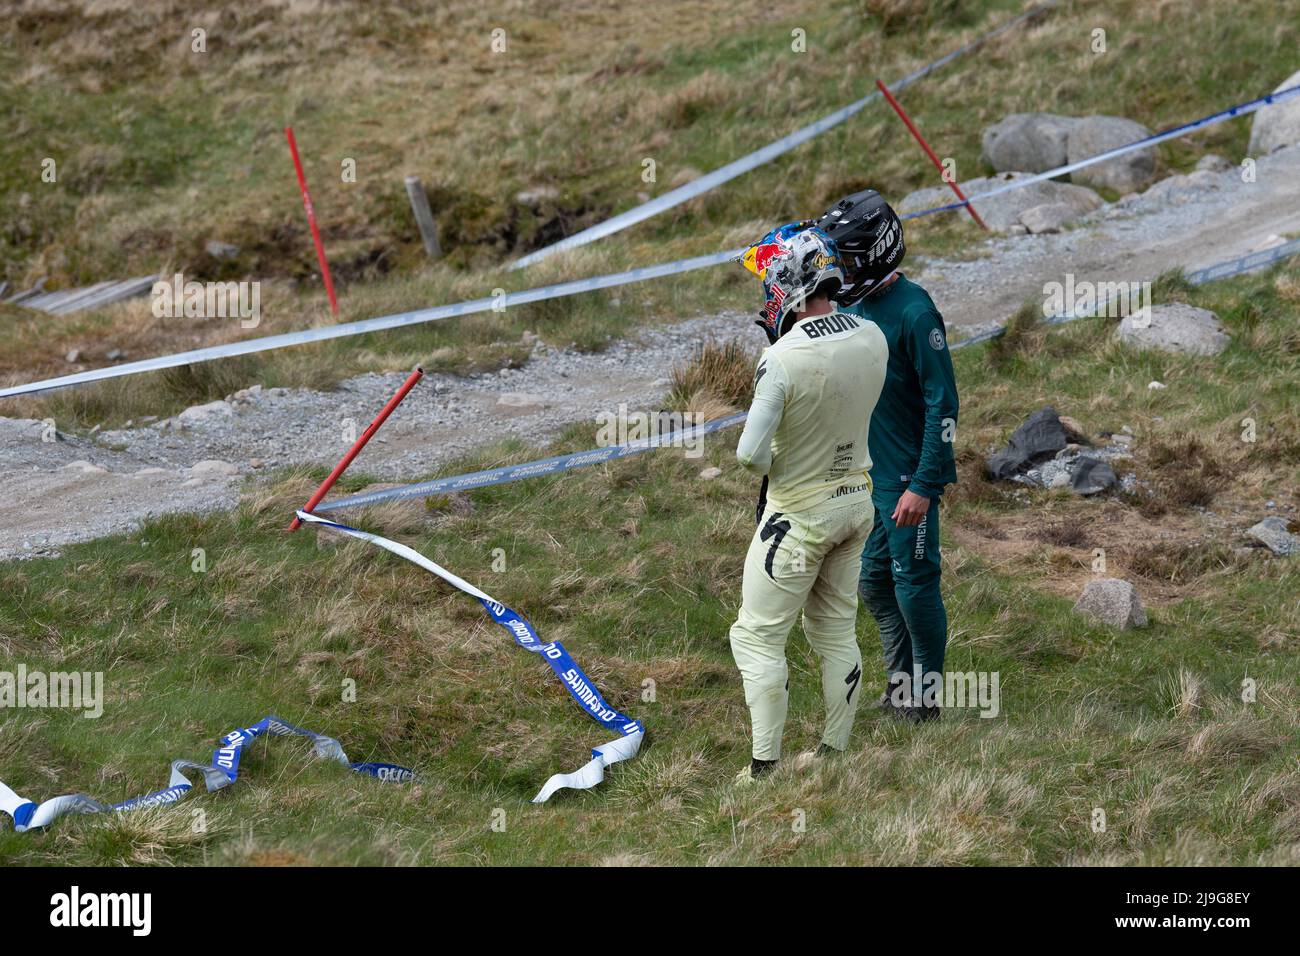 Loic Bruni at side of track after large crash that left him with a broken collarbone and out of the race - UCI Mountain Bike World Cup Fort William Stock Photo